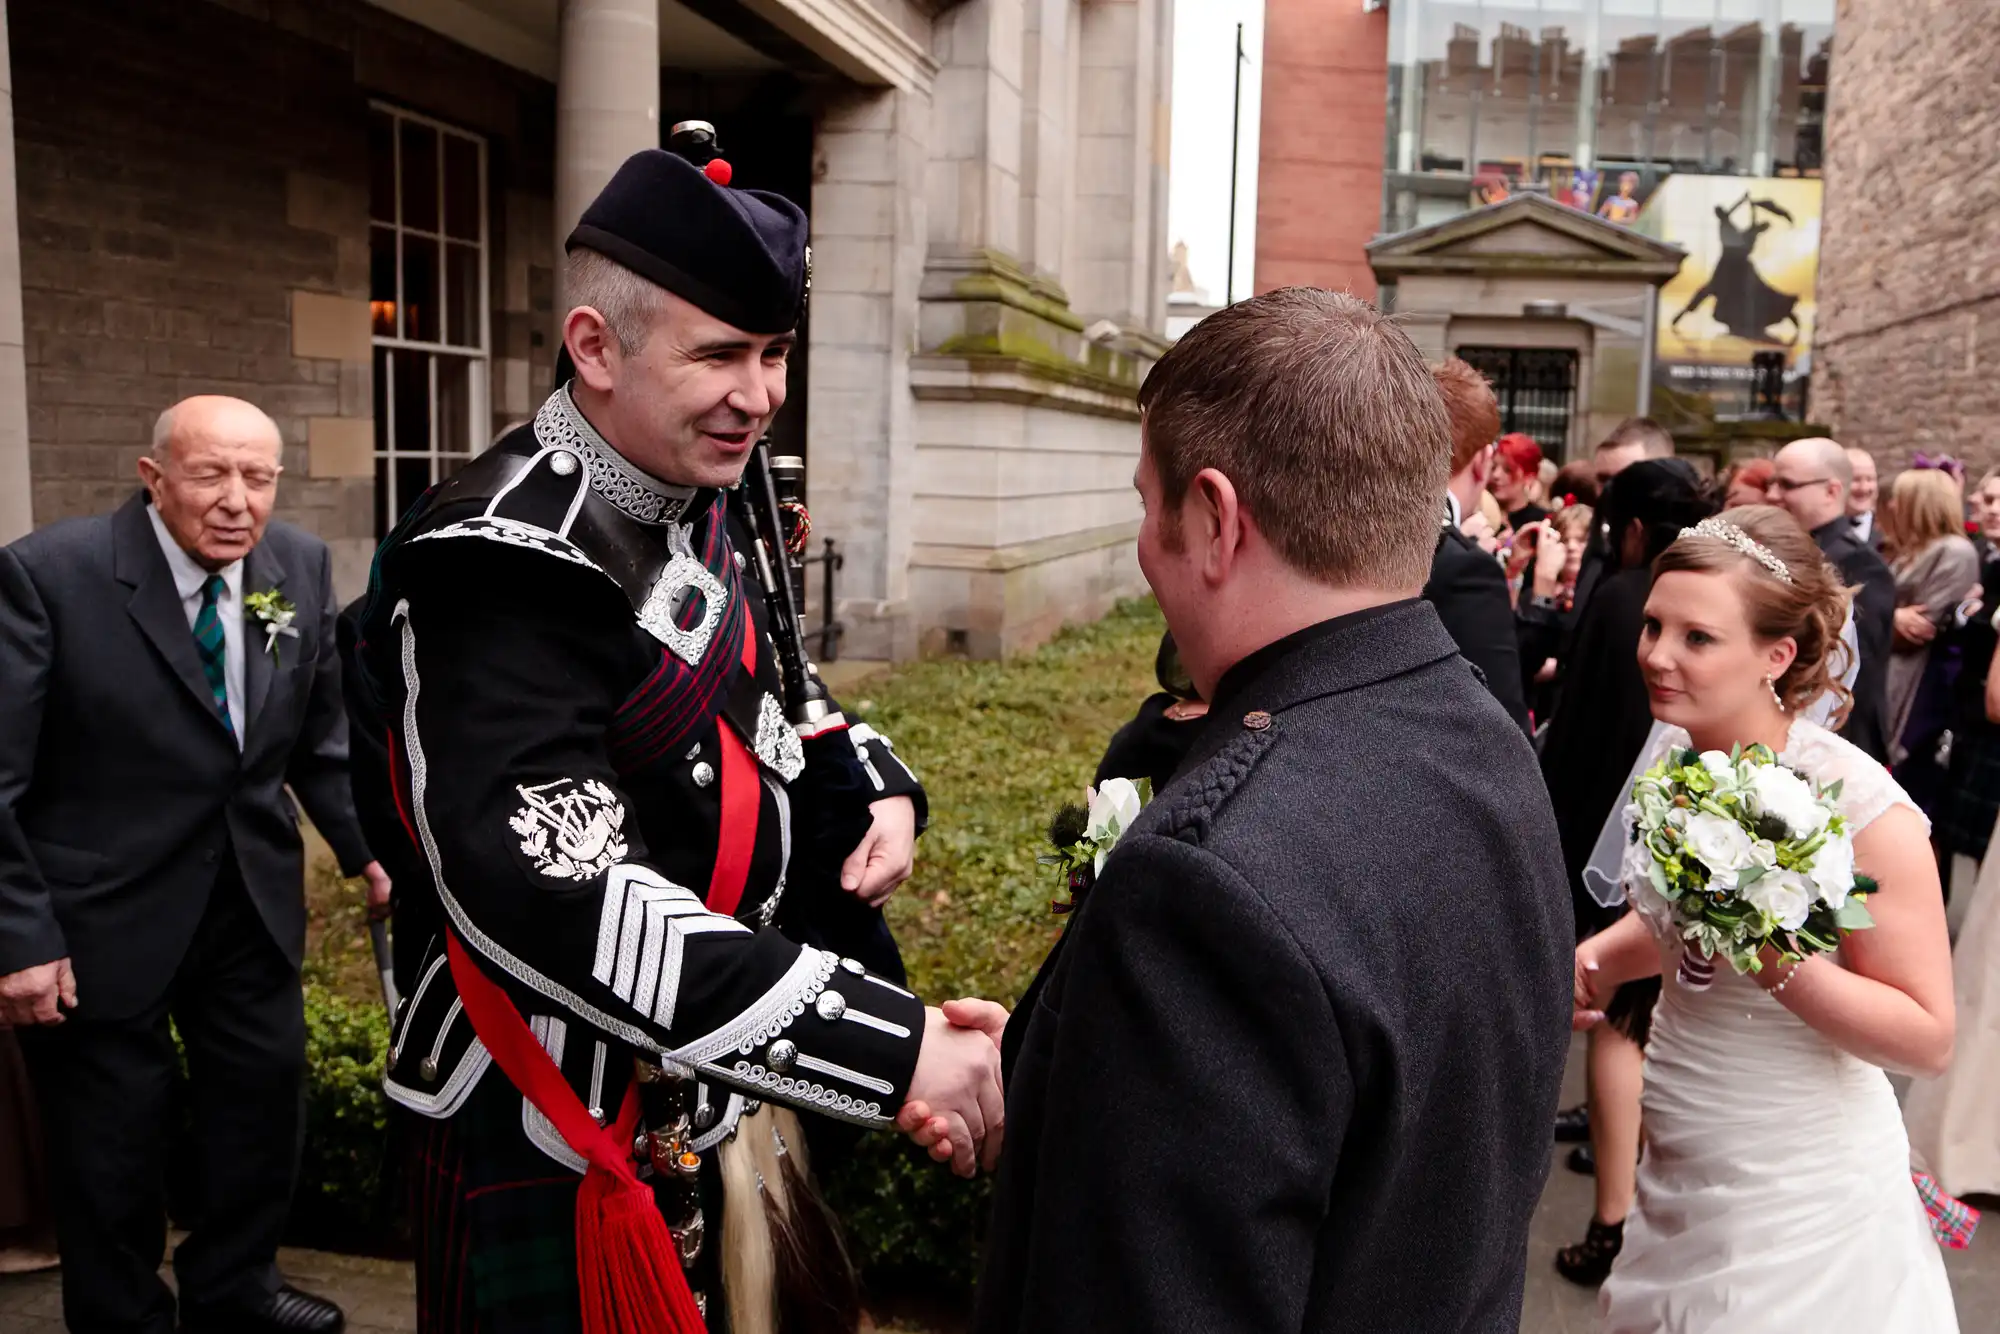 A bride looks on as a man in a scottish kilt shakes hands with another man at a wedding ceremony outside a building.